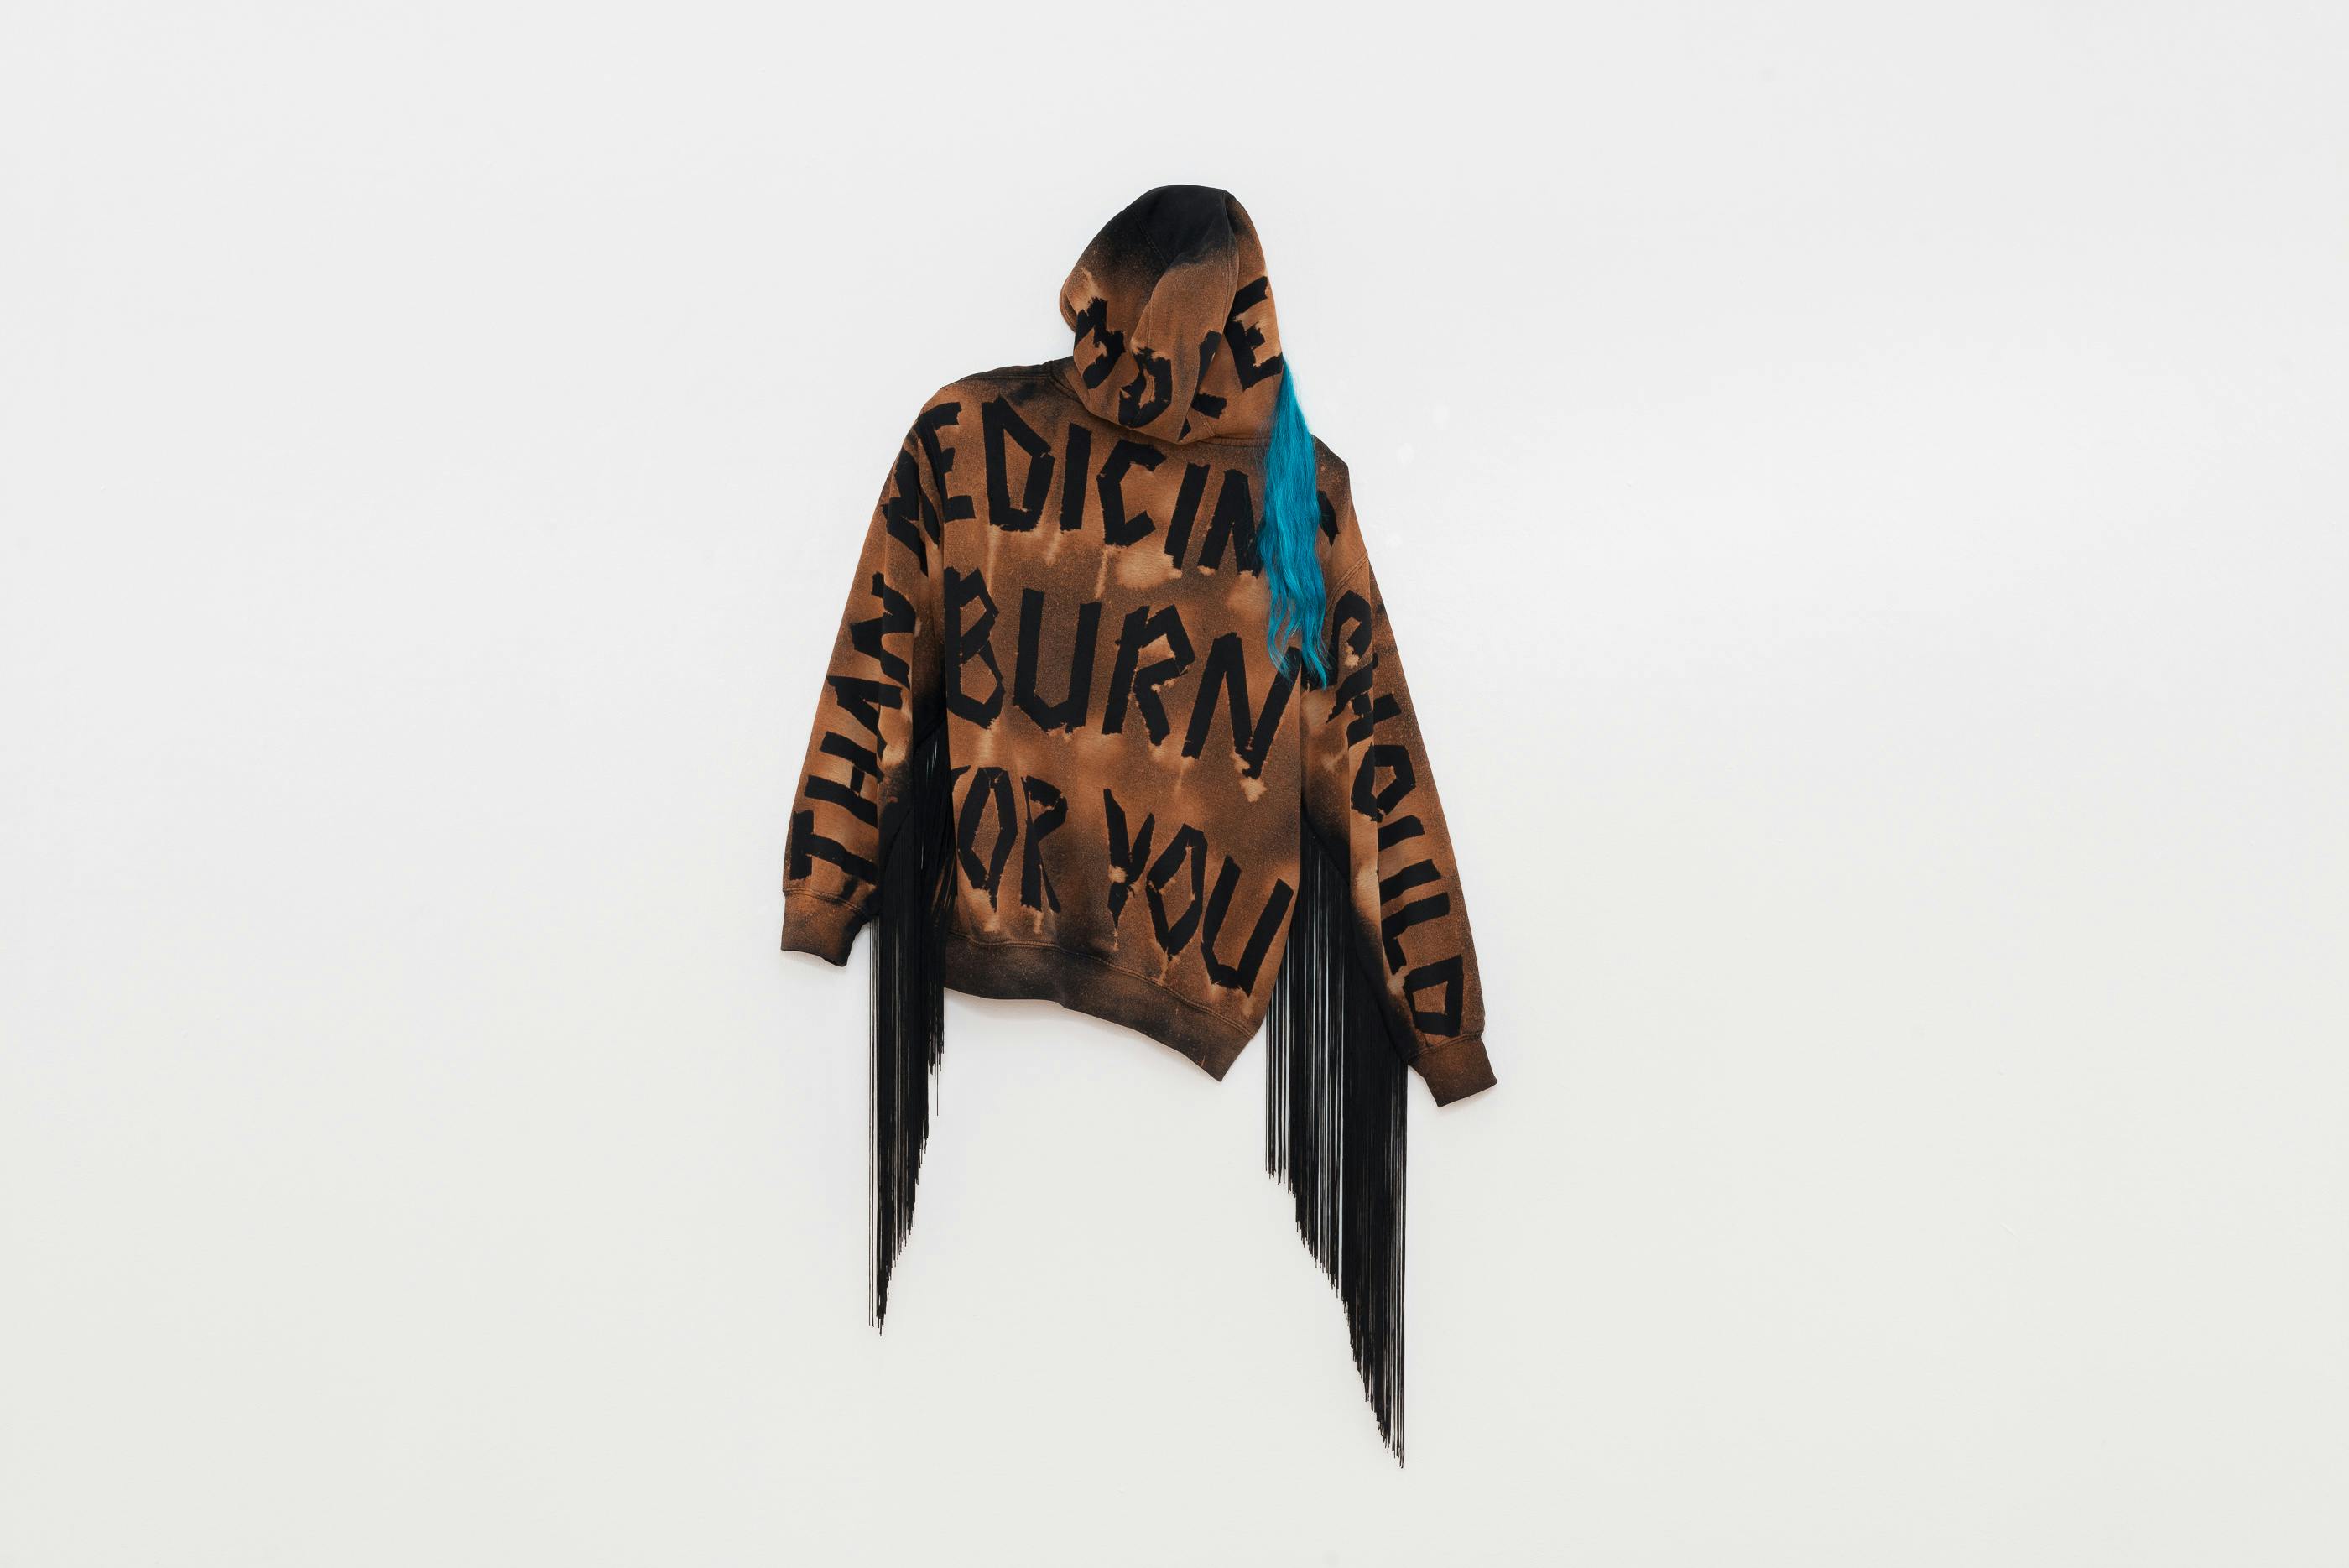 A brown hoodie with bold, black text hangs on a gallery wall so that the back is visible. Blue hair emerges from the hood and black fringe hangs down from each sleeve.